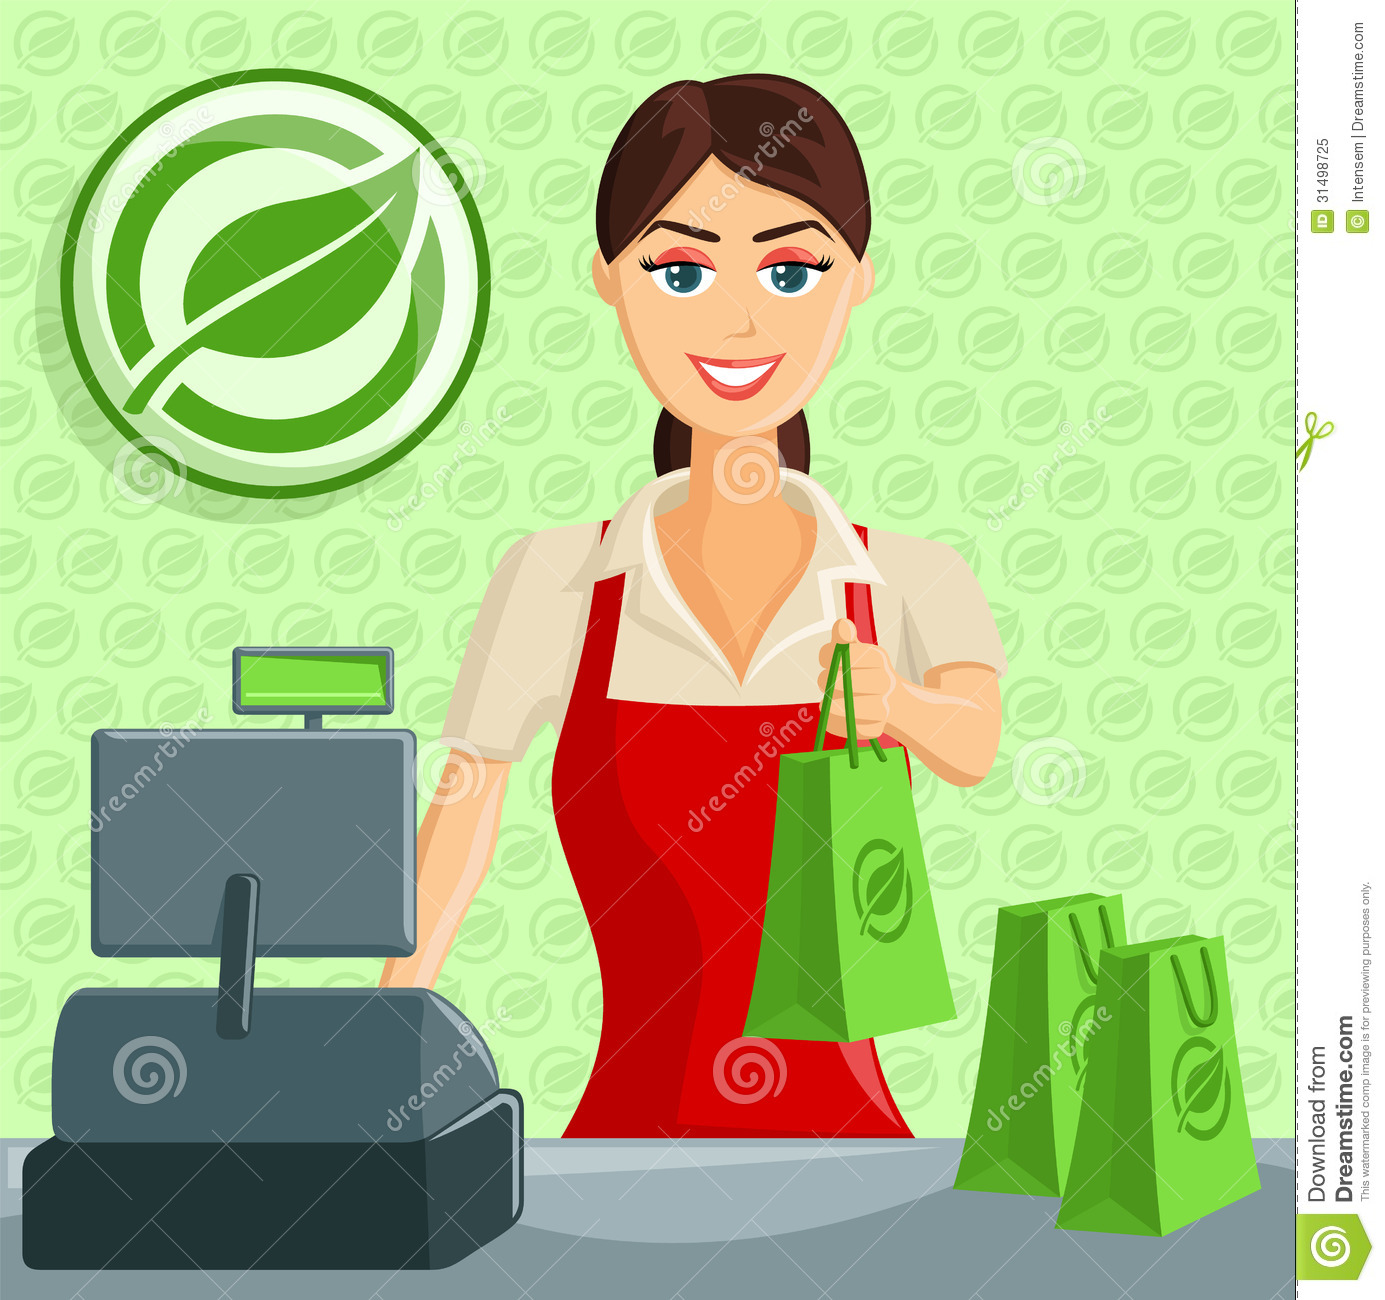 Smiling Cashier Girl At Eco Green Store Royalty Free Stock Photo